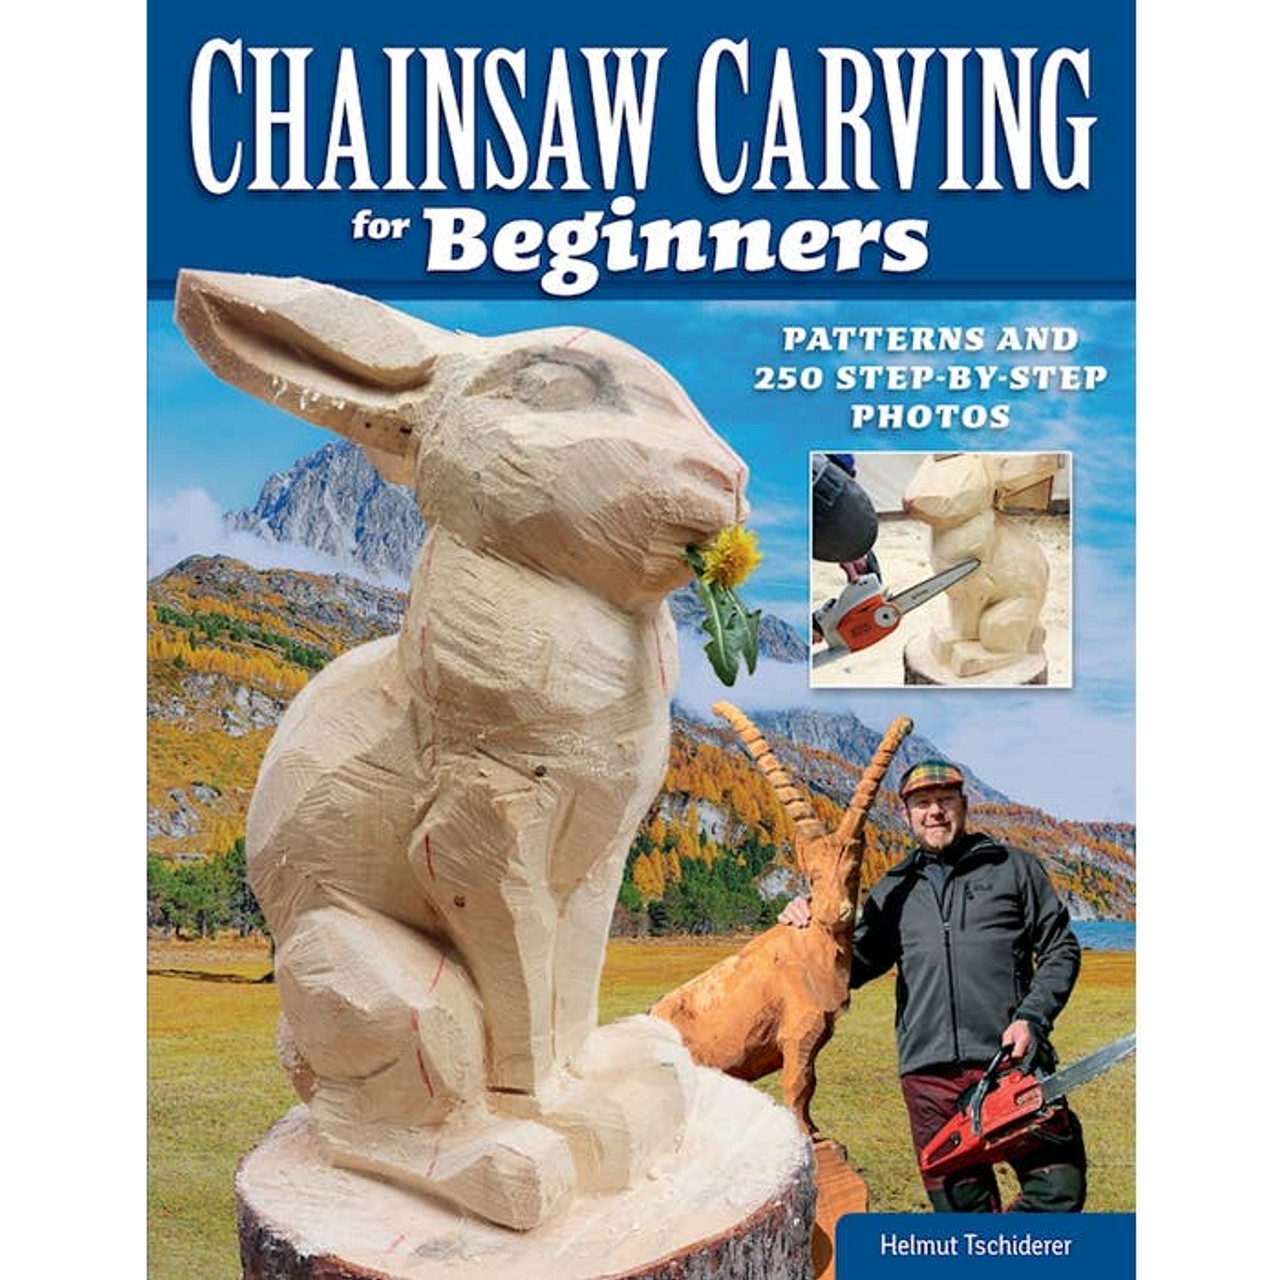 Presenting the cover of Chainsaw Carving for Beginners book with a couple of the projects you can complete.